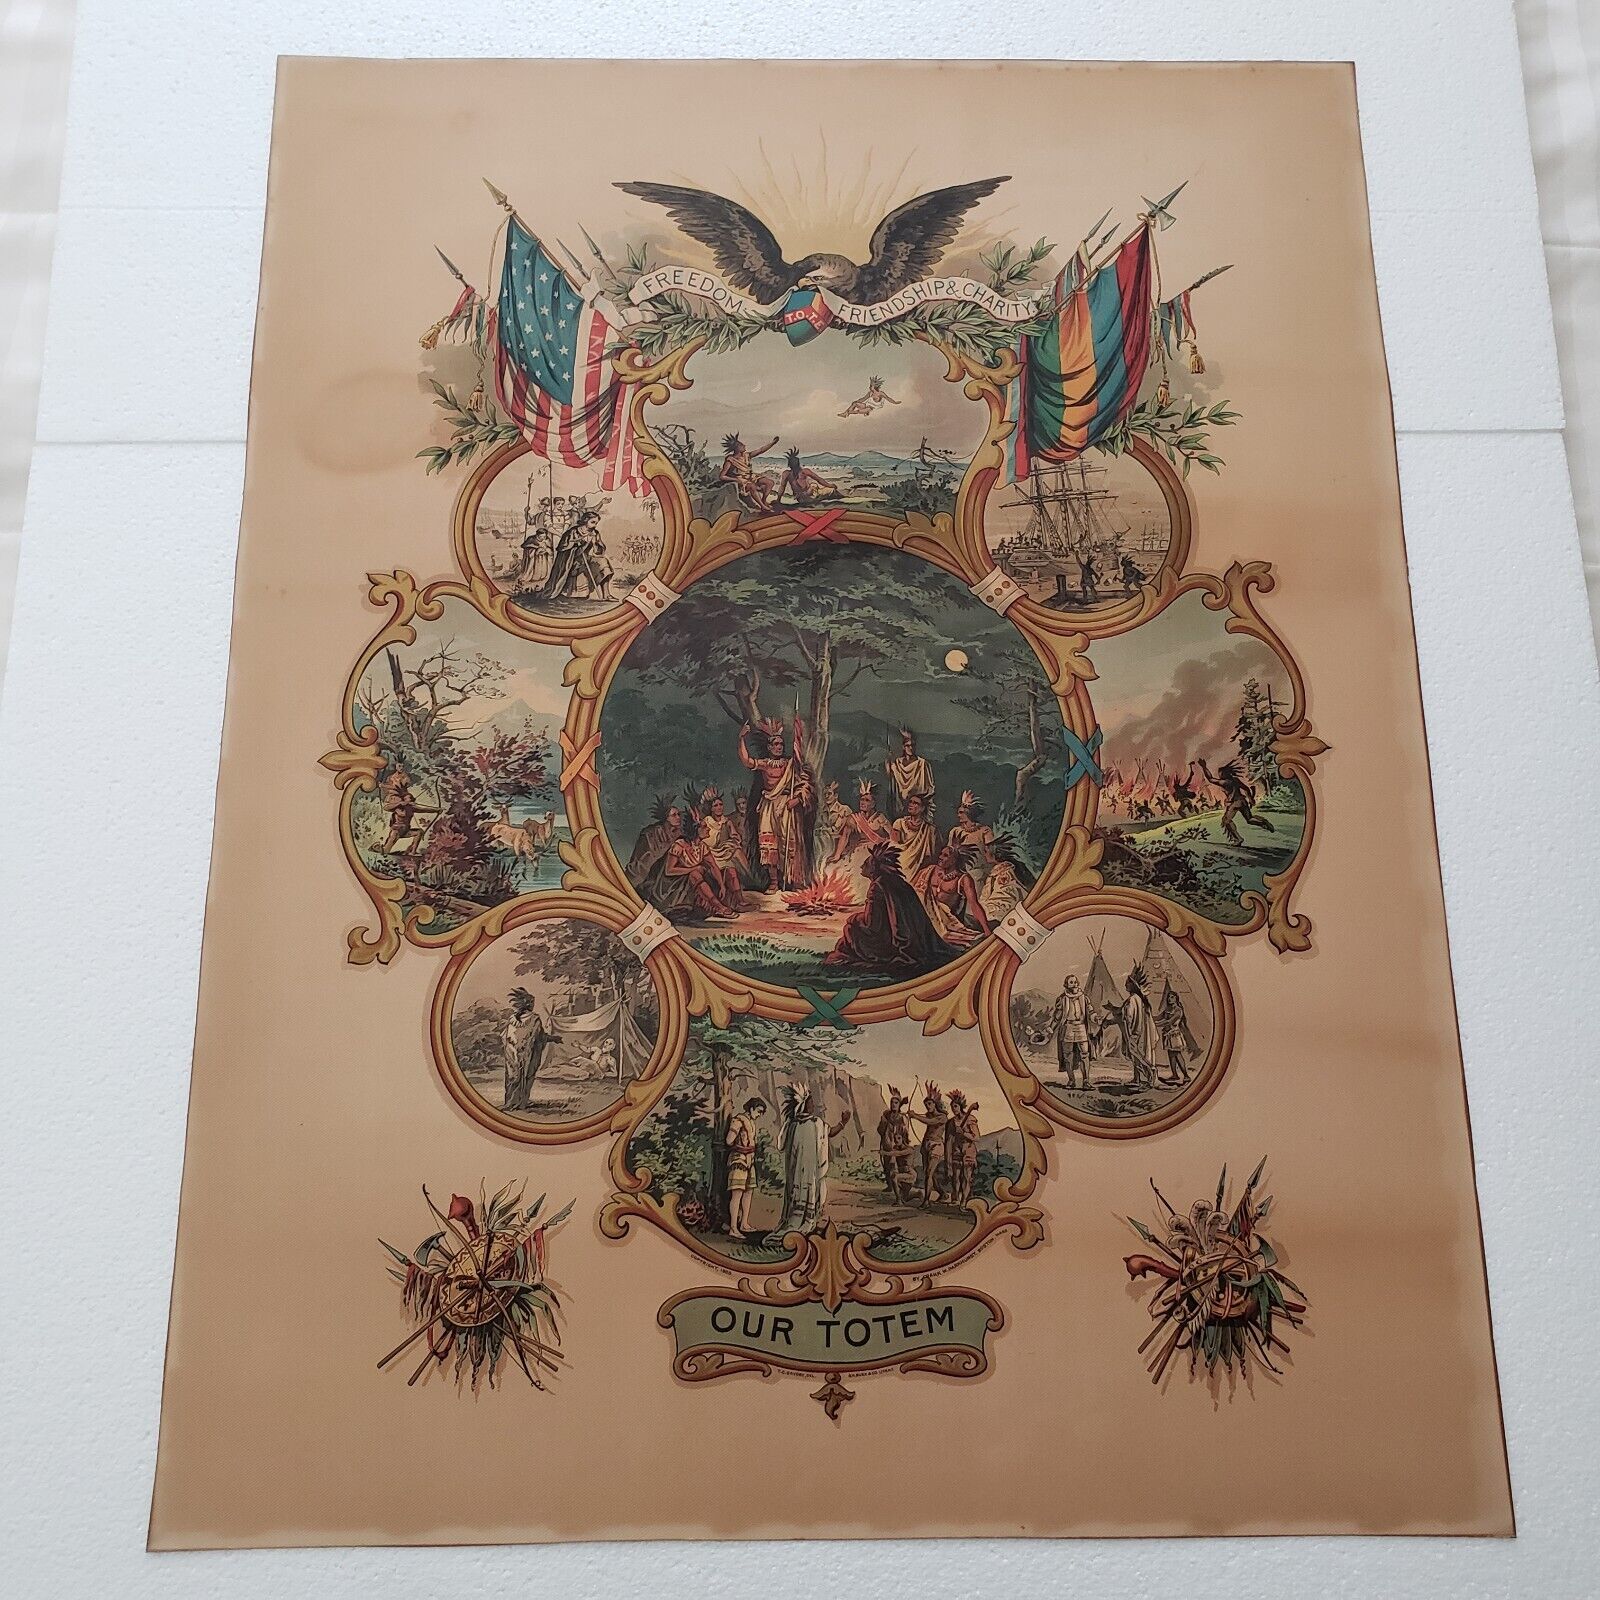 OUR TOTEM / Original 1888 Improved Order of Red Men LITHOGRAPH Print in COLOR